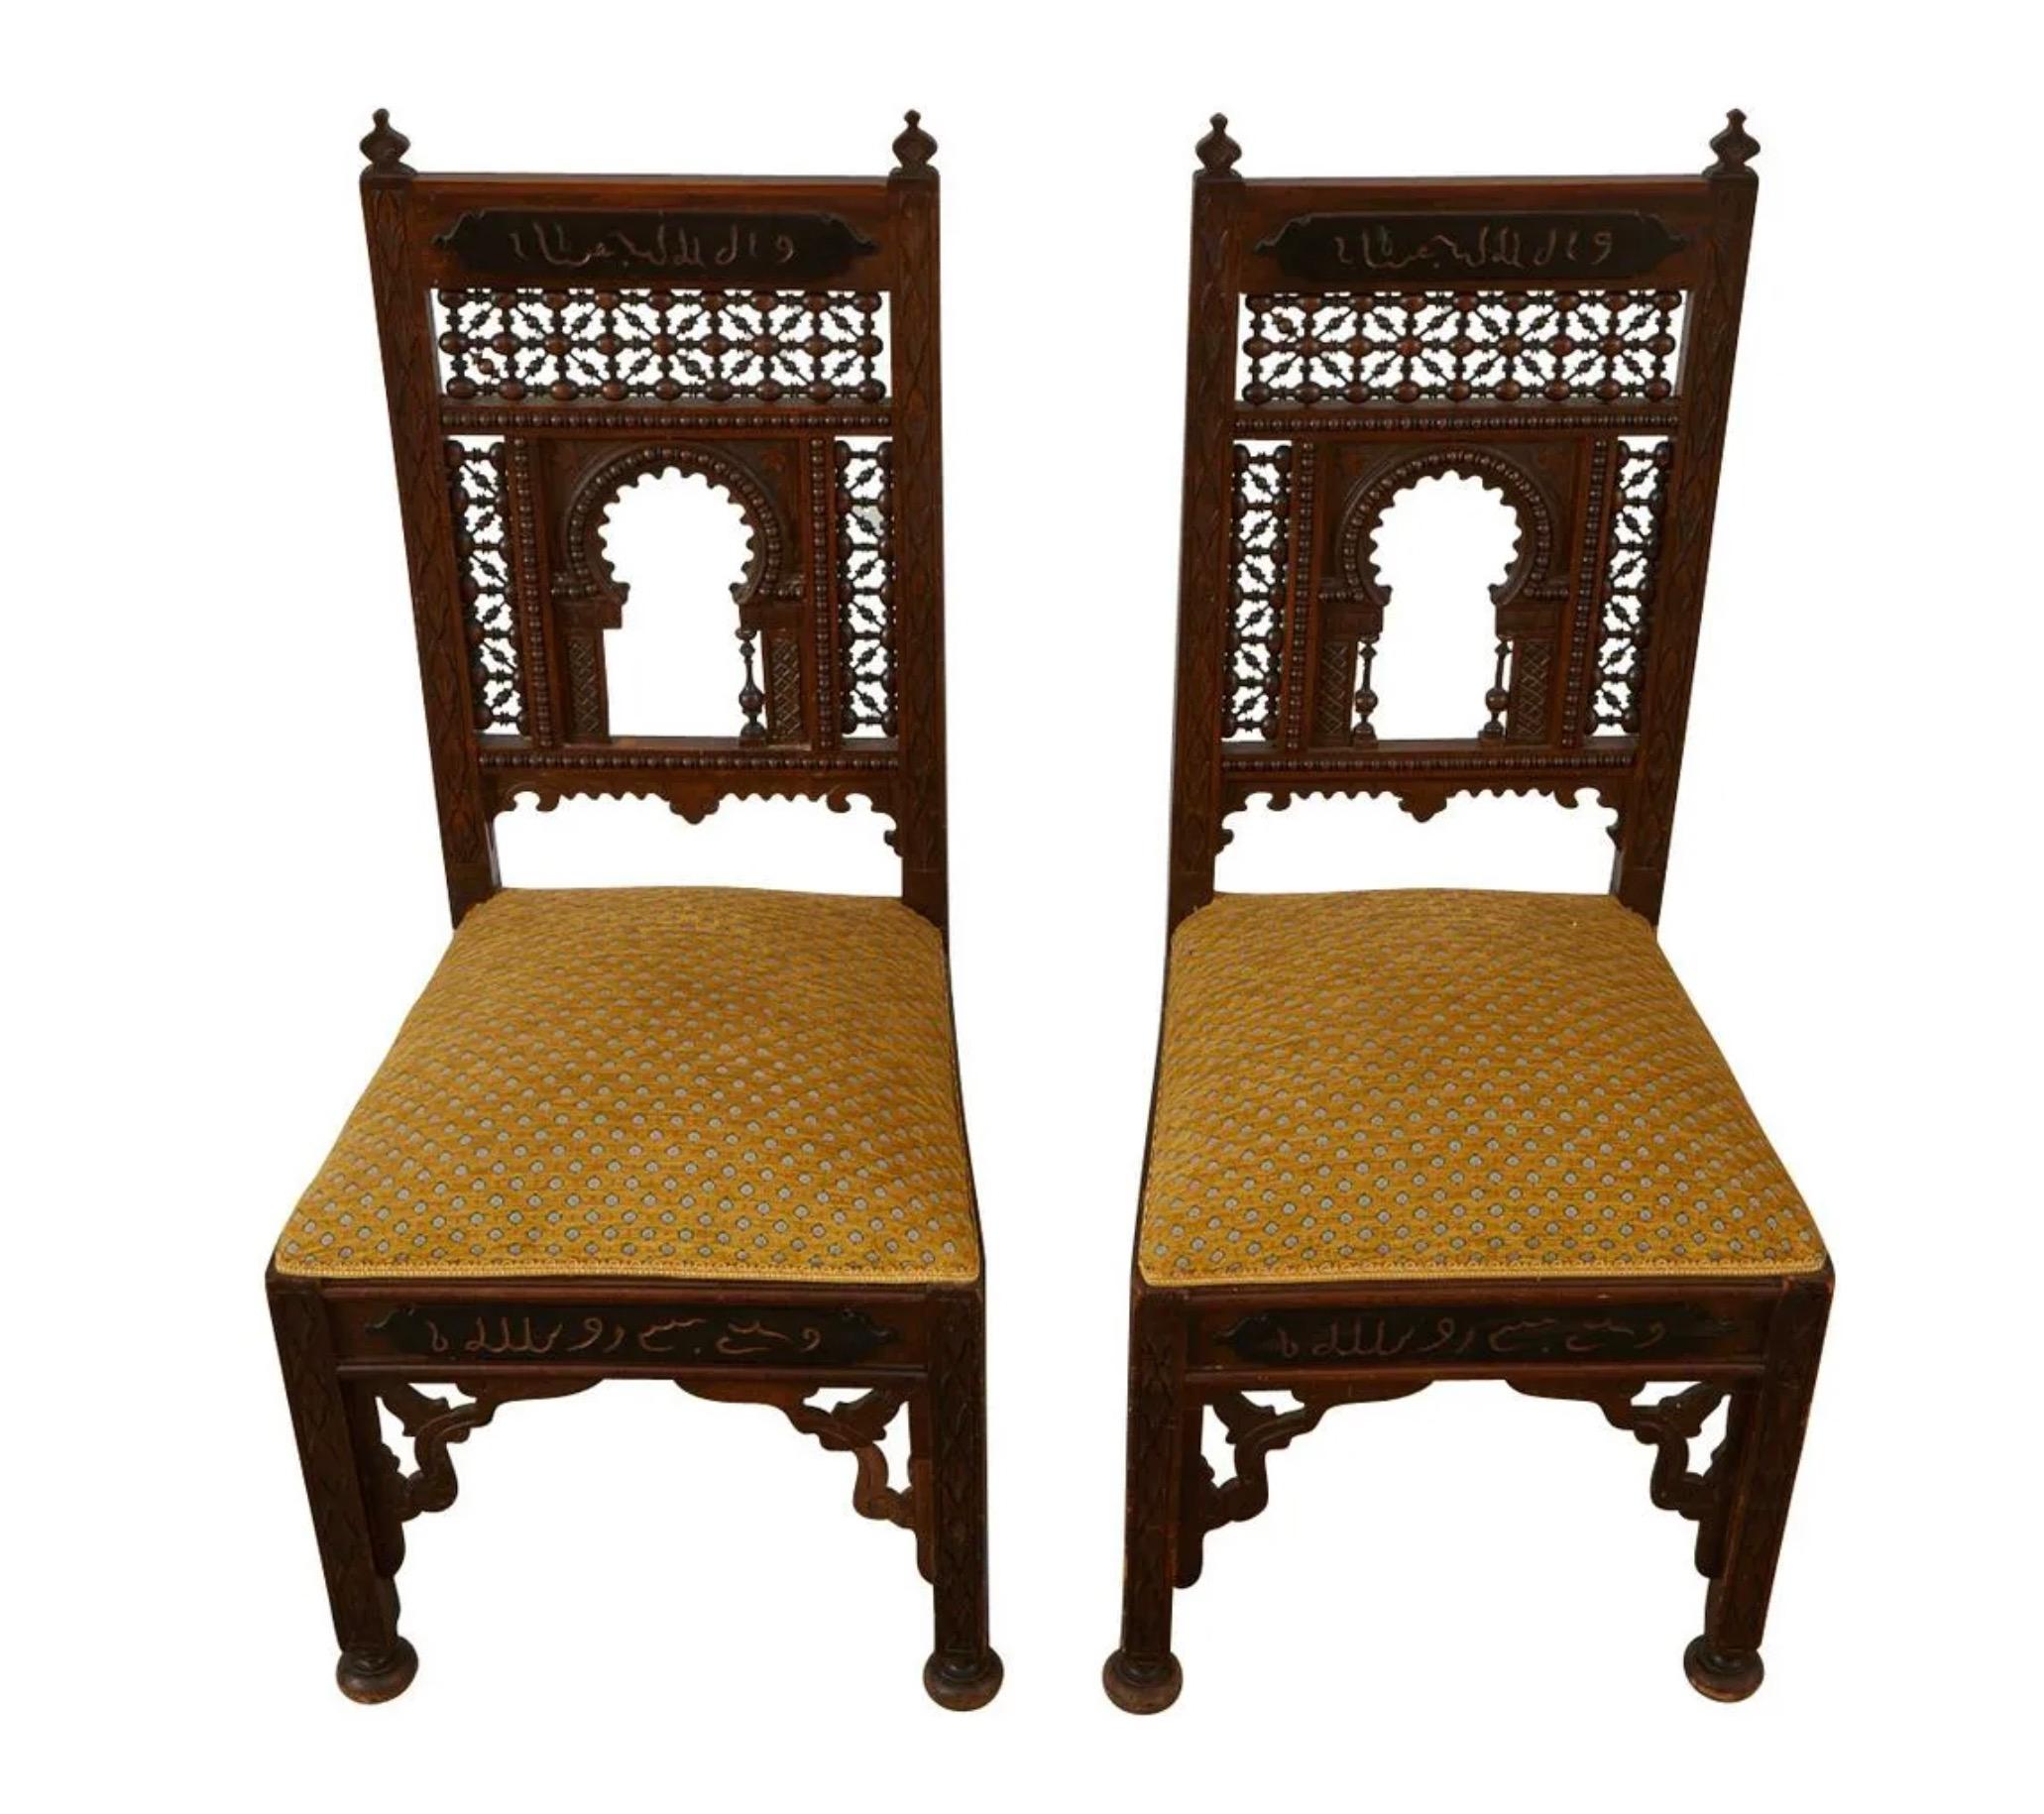 20th Century Pair of Syrian Carved Wooden Chairs